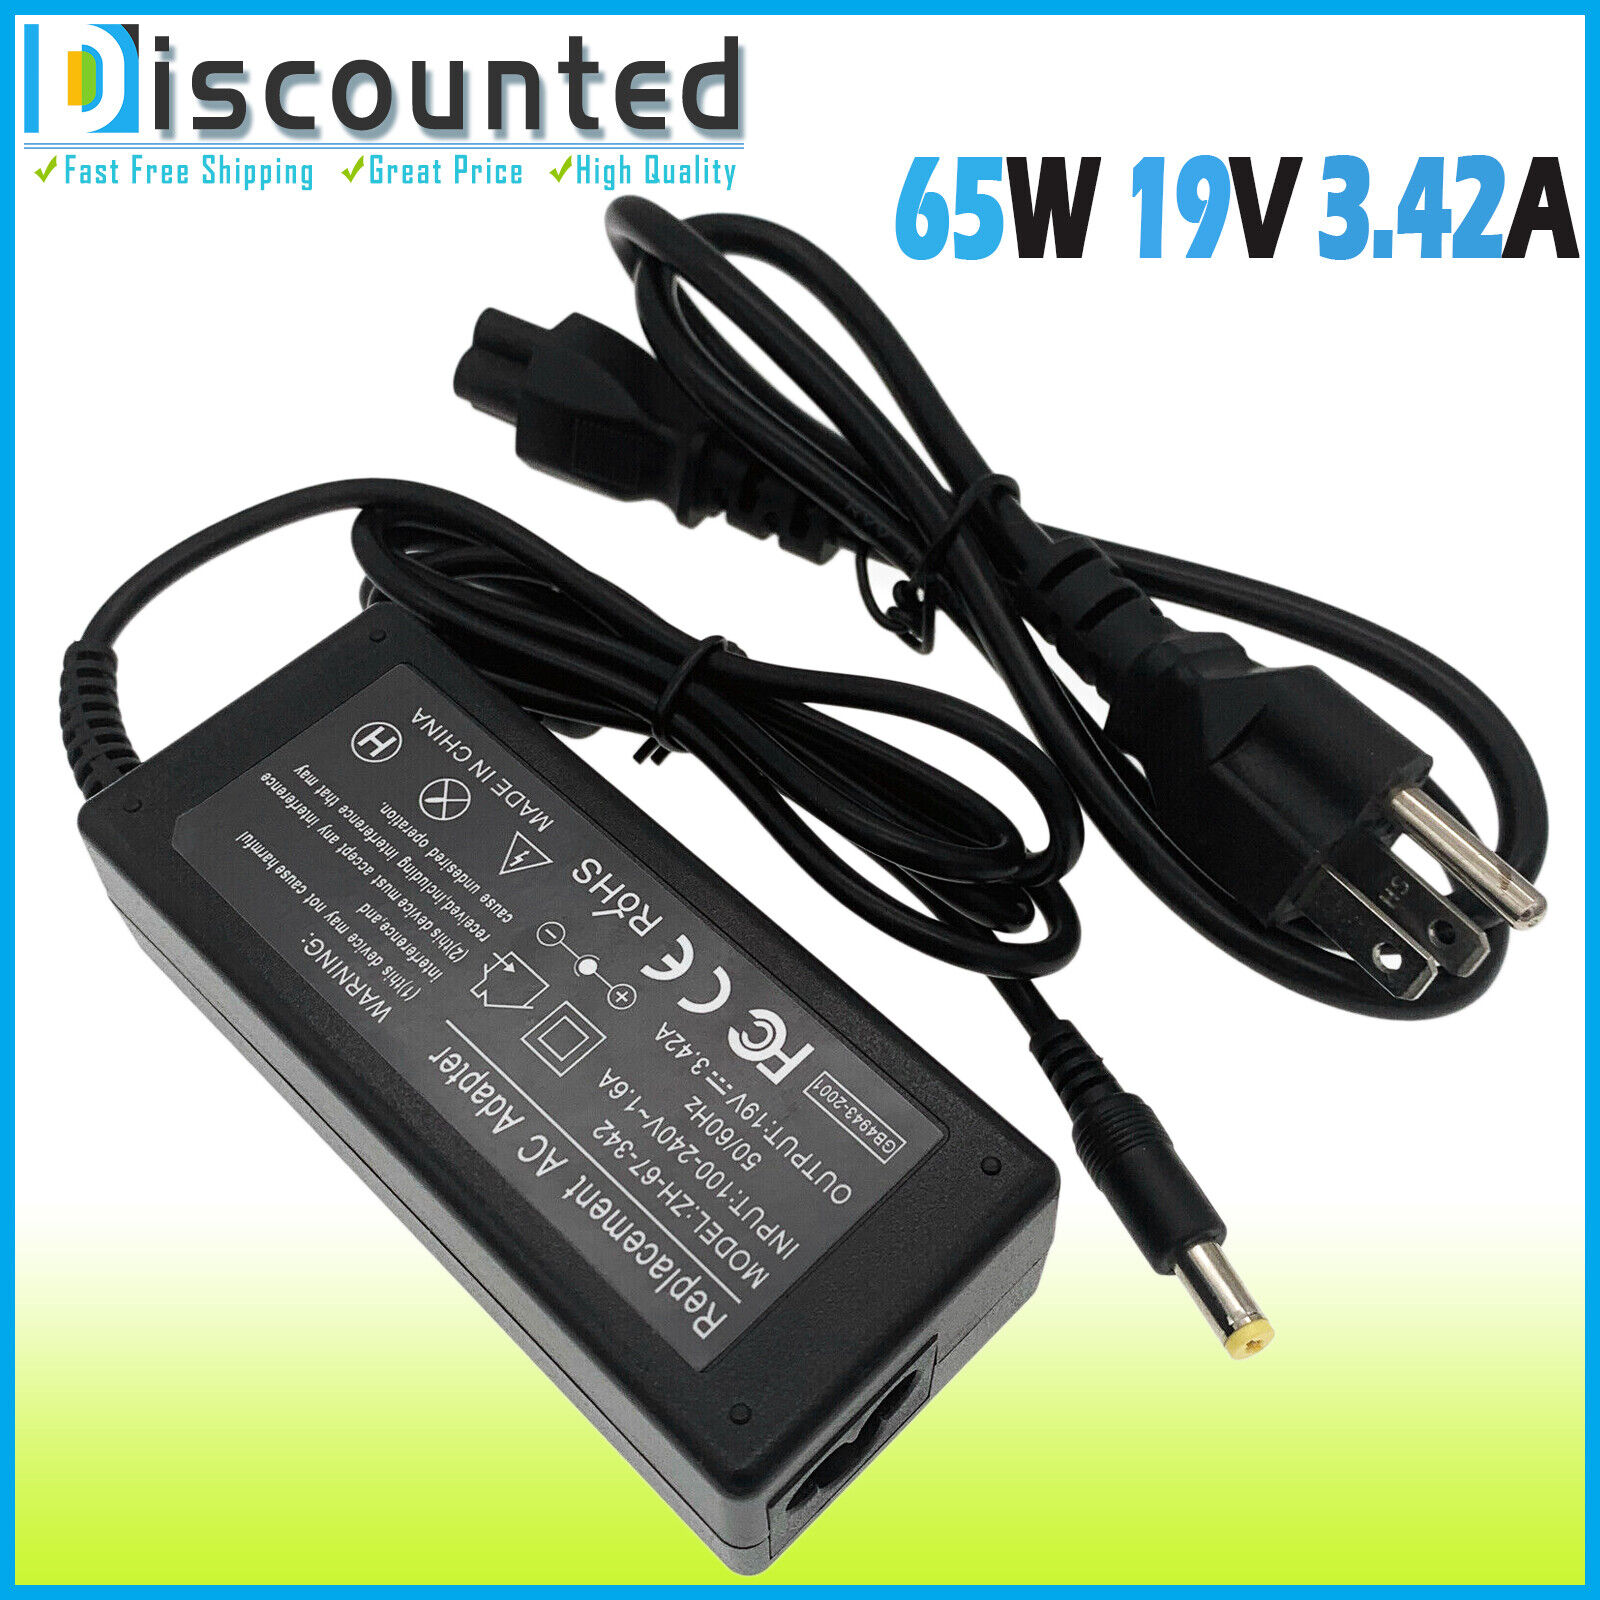 AC Adapter For Viewsonic VX2476-SMHD VS16510 LED LCD Monitor Power Supply Cord